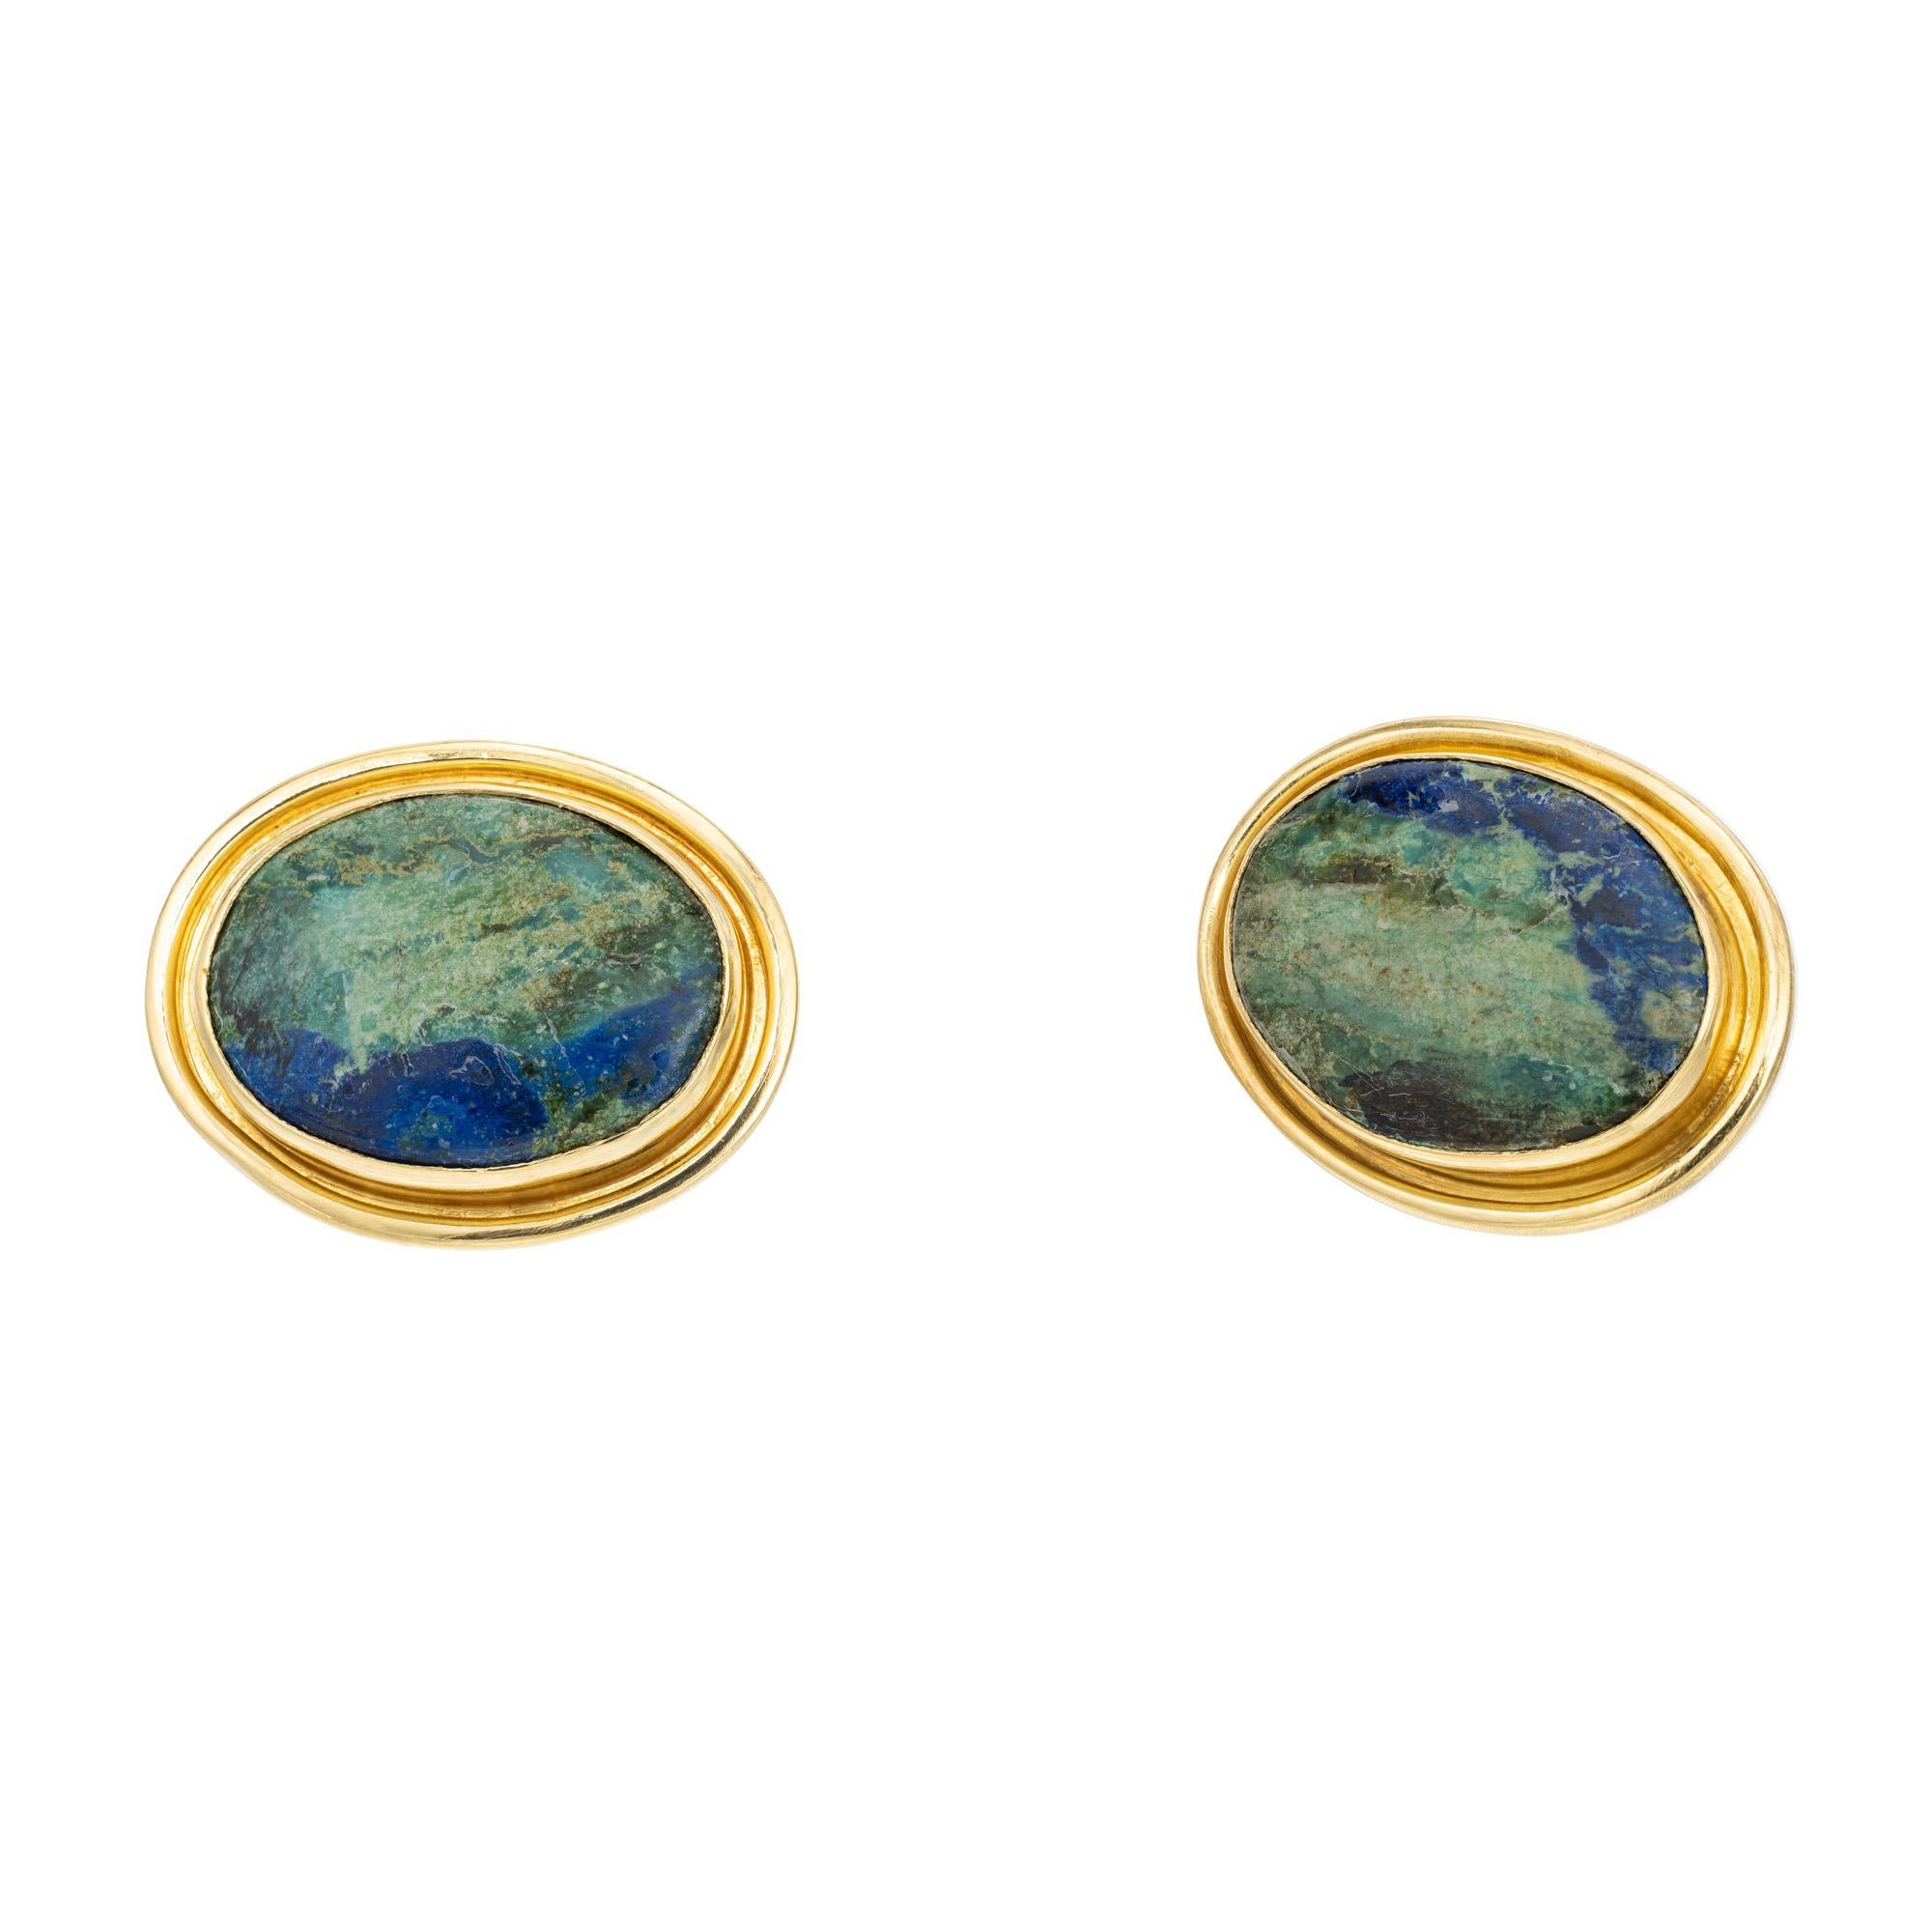 Oval Azurite Malachite gold clip post earrings. Two oval green and blue oval cabochon Azurite Malachite gemstones mounted in 22k yellow gold settings. The rich blend of azurite and malachite stones contrast beautifully against the lustrous yellow